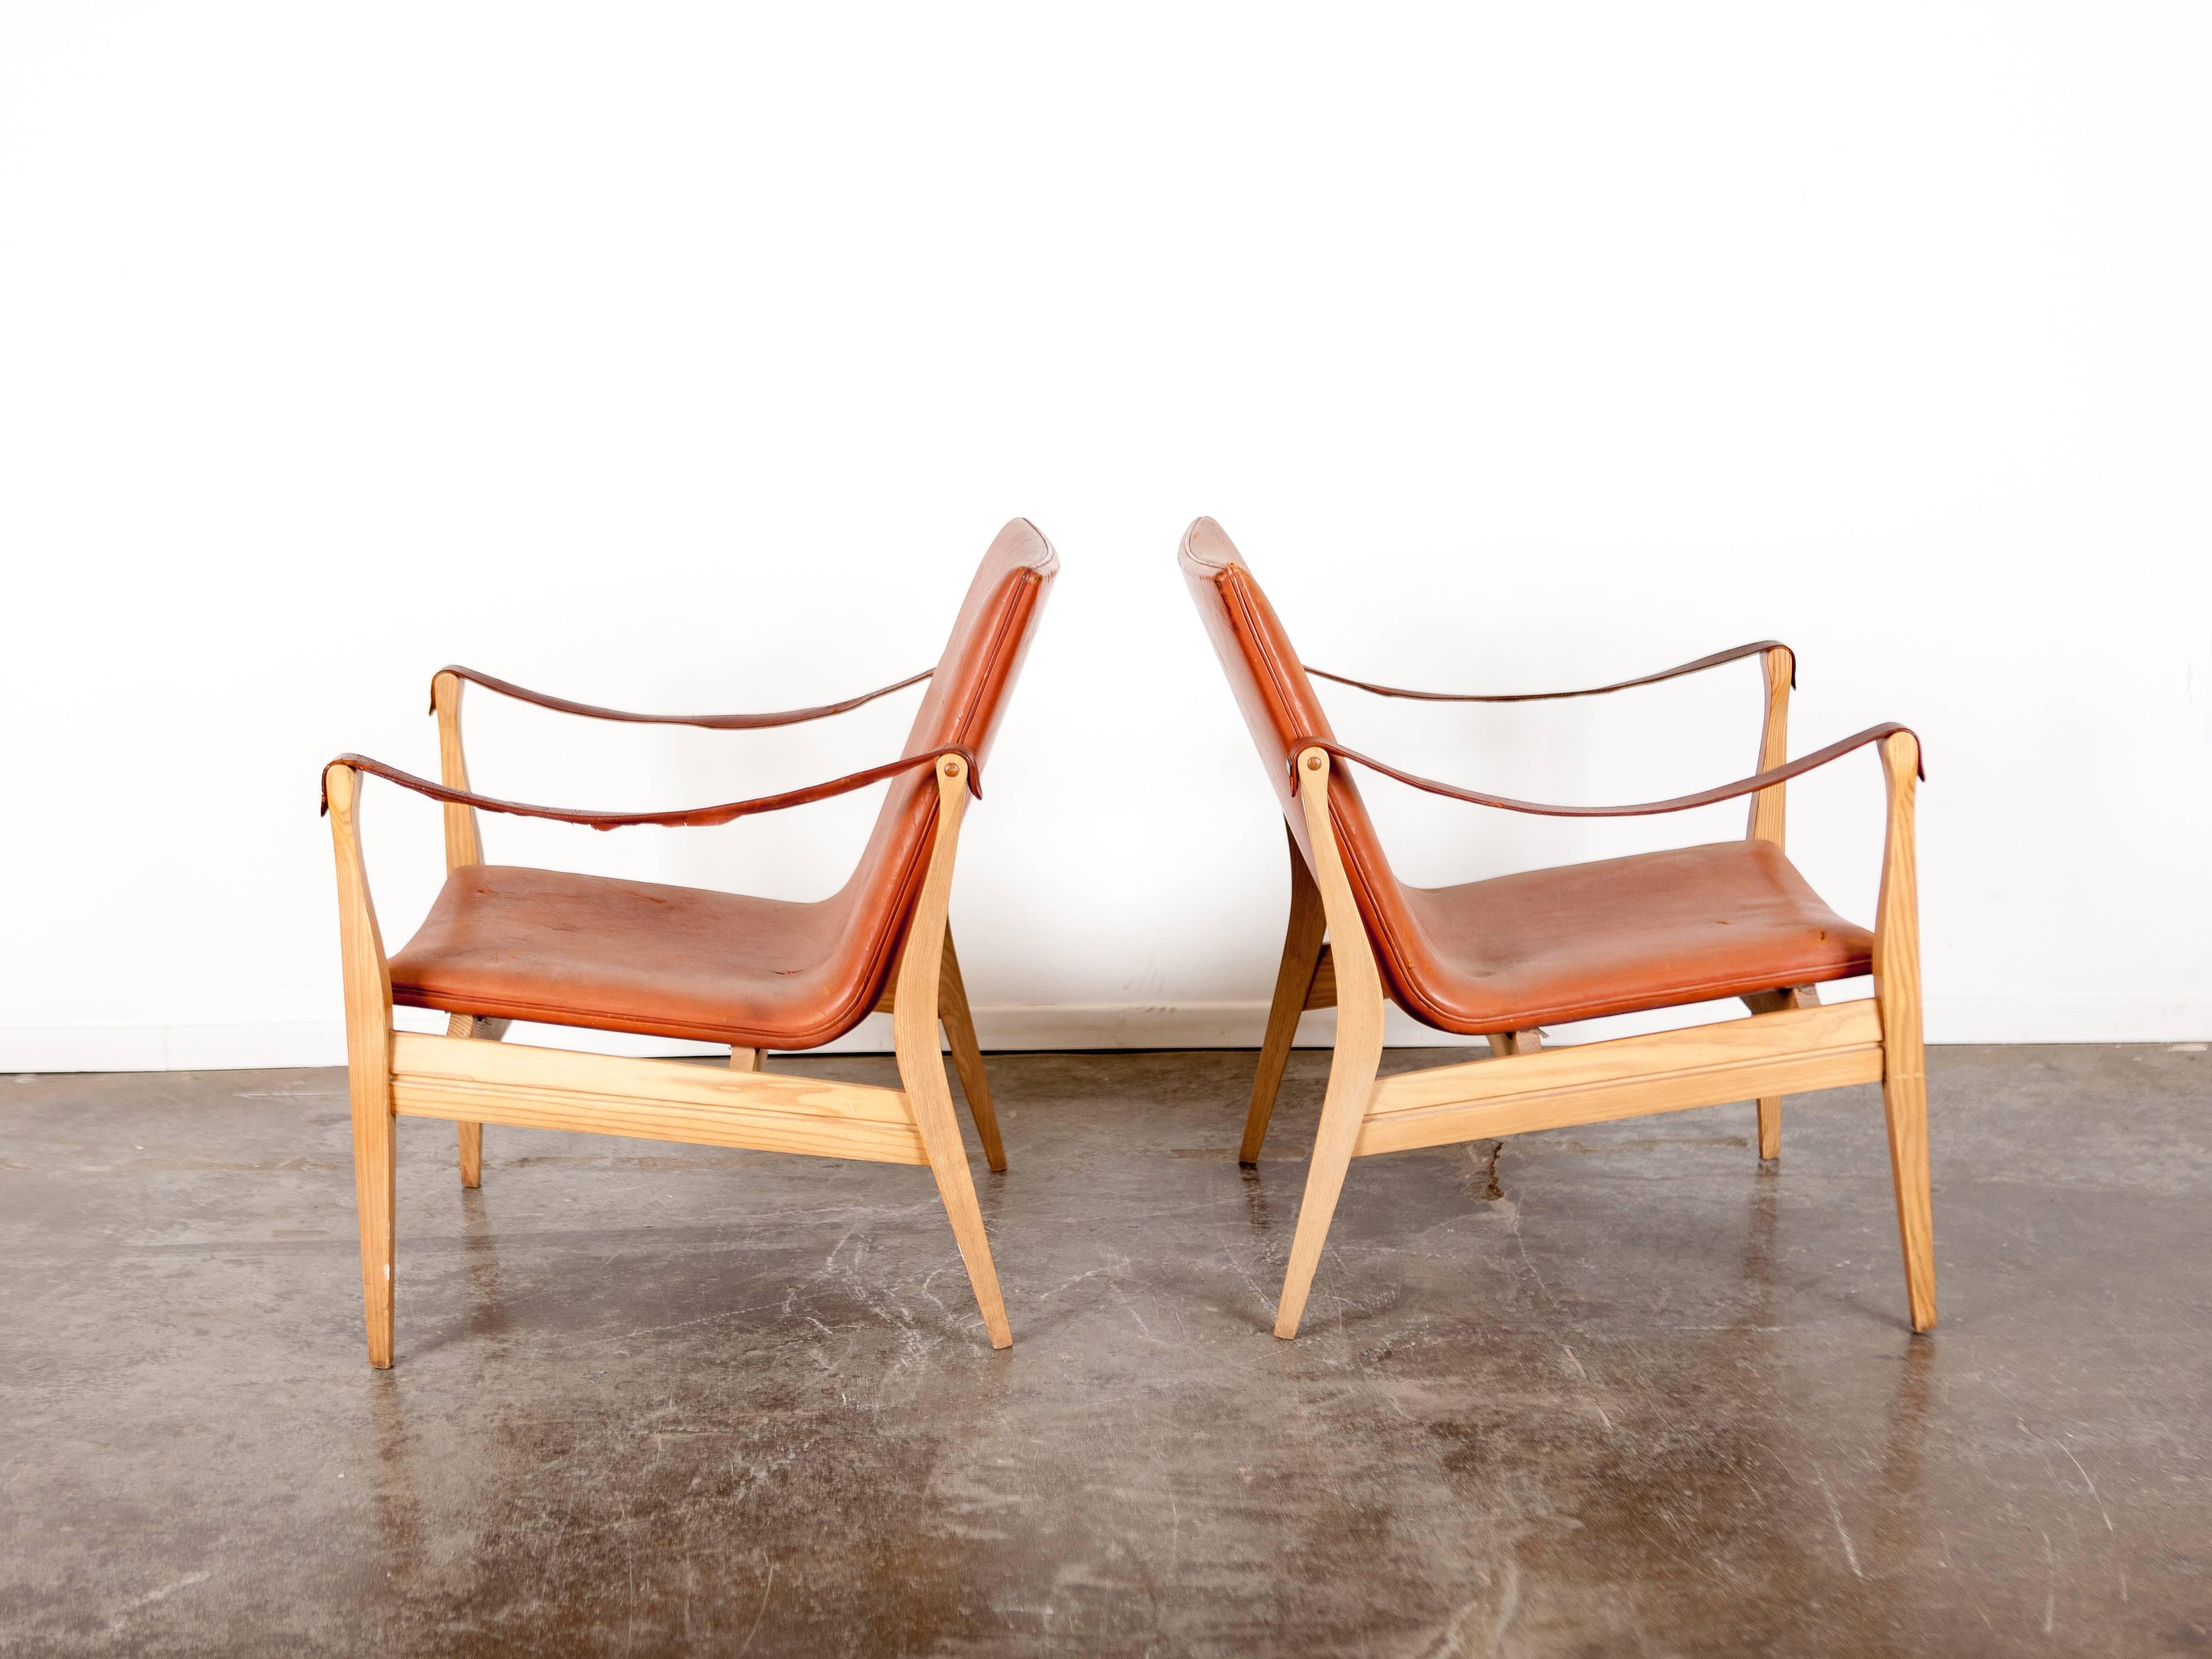 Rare pair of Ebbe & Karen Clemmensen. Safari chairs with original brown leather and an ash frame. Model 4305, designed in 1958, Danish, produced by Fritz Hansen. Some wear and a few small tears in one of the chairs which has been repaired.